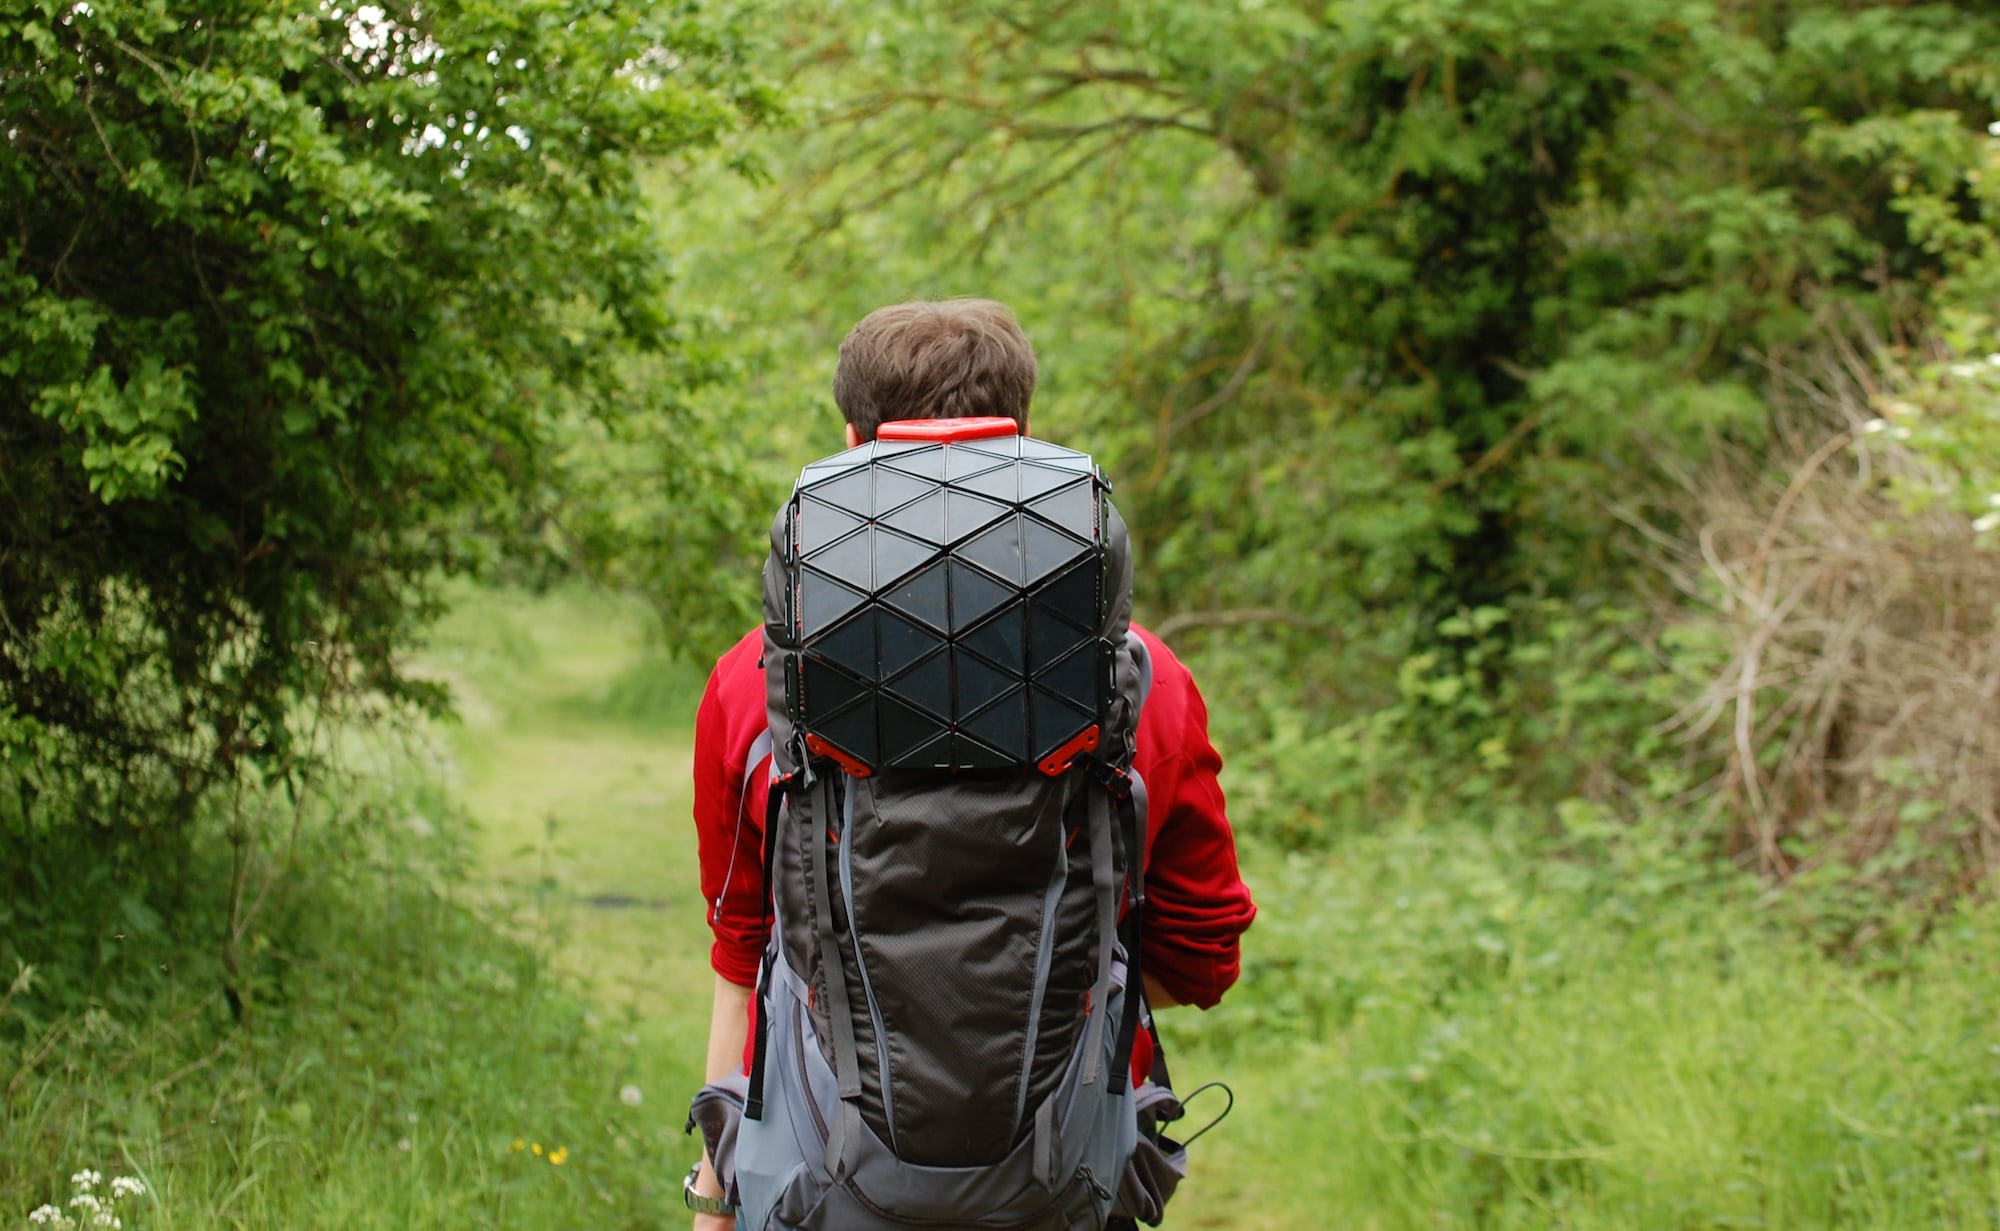 This Solar Backpack Has Integrade Panels on Top